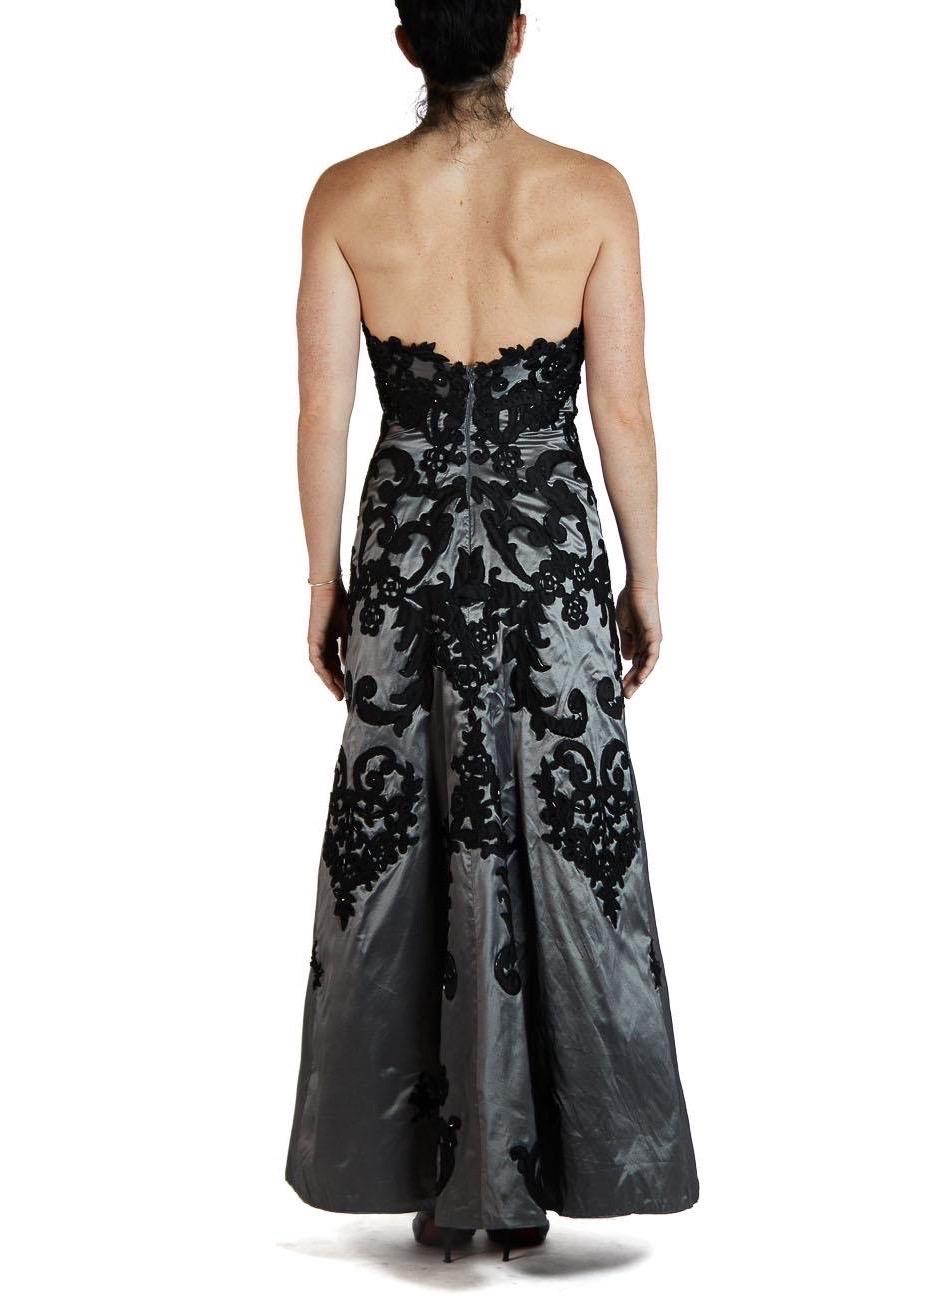 1980S Black Metallic Rayon/Lurex Strapless Gown With Baroque Appliqués For Sale 2